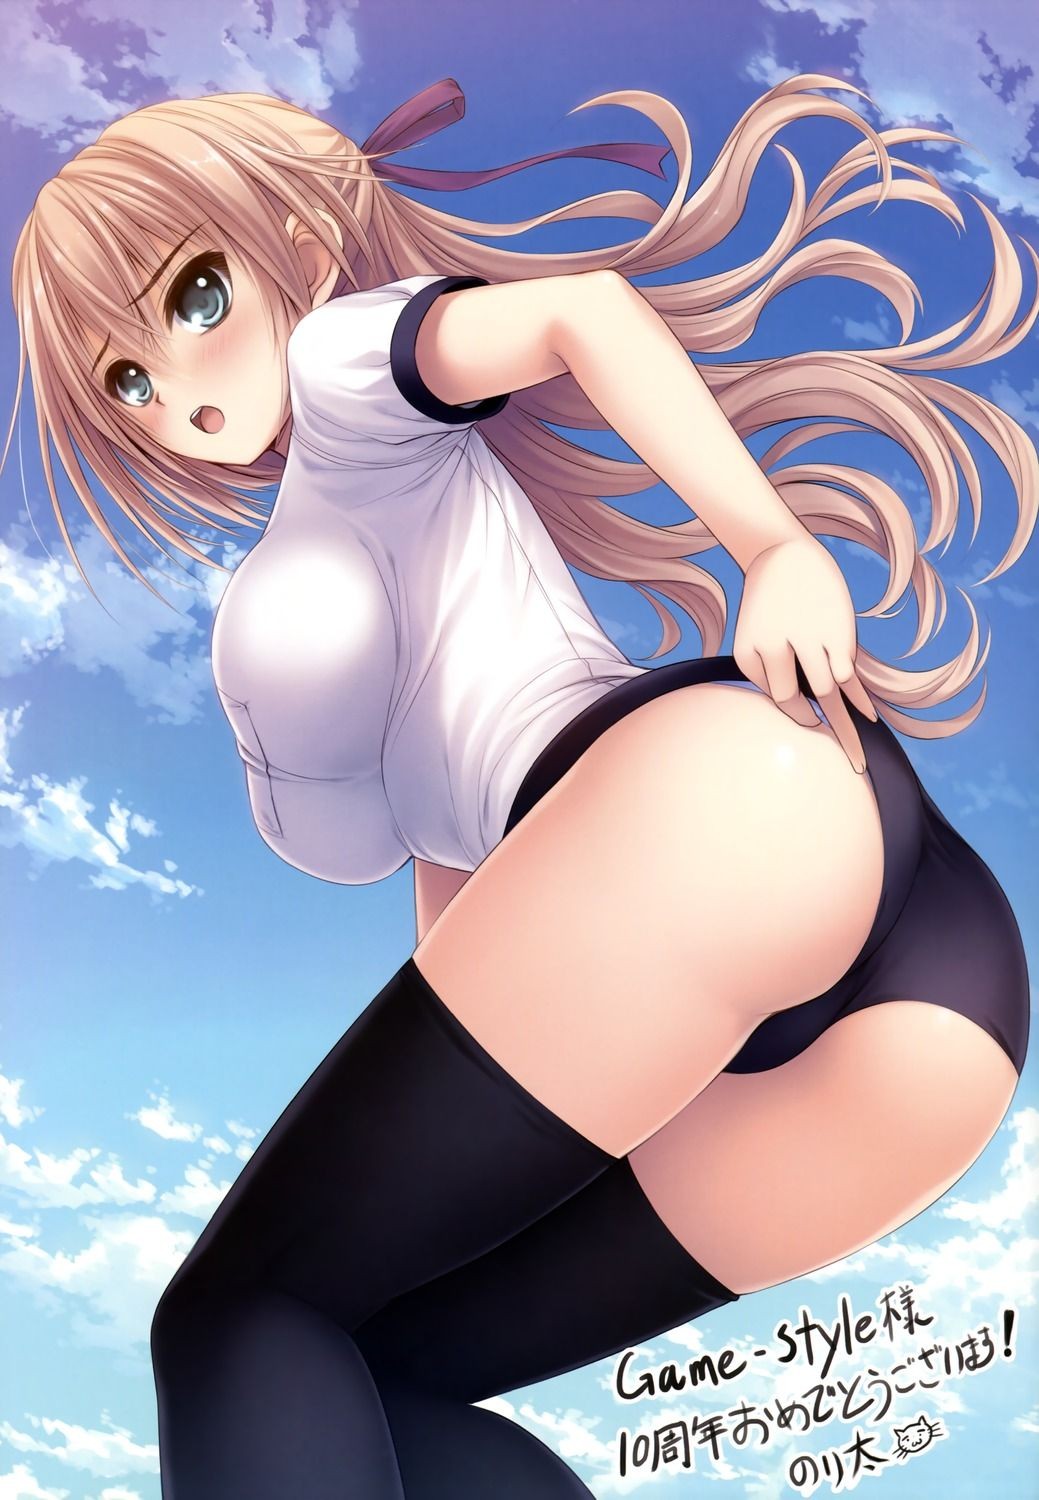 Pica Cane Want Thighs! The Second Erotic Picture Of The Girl Wearing Bloomers And Gymnastics Wwww Part4 Milf